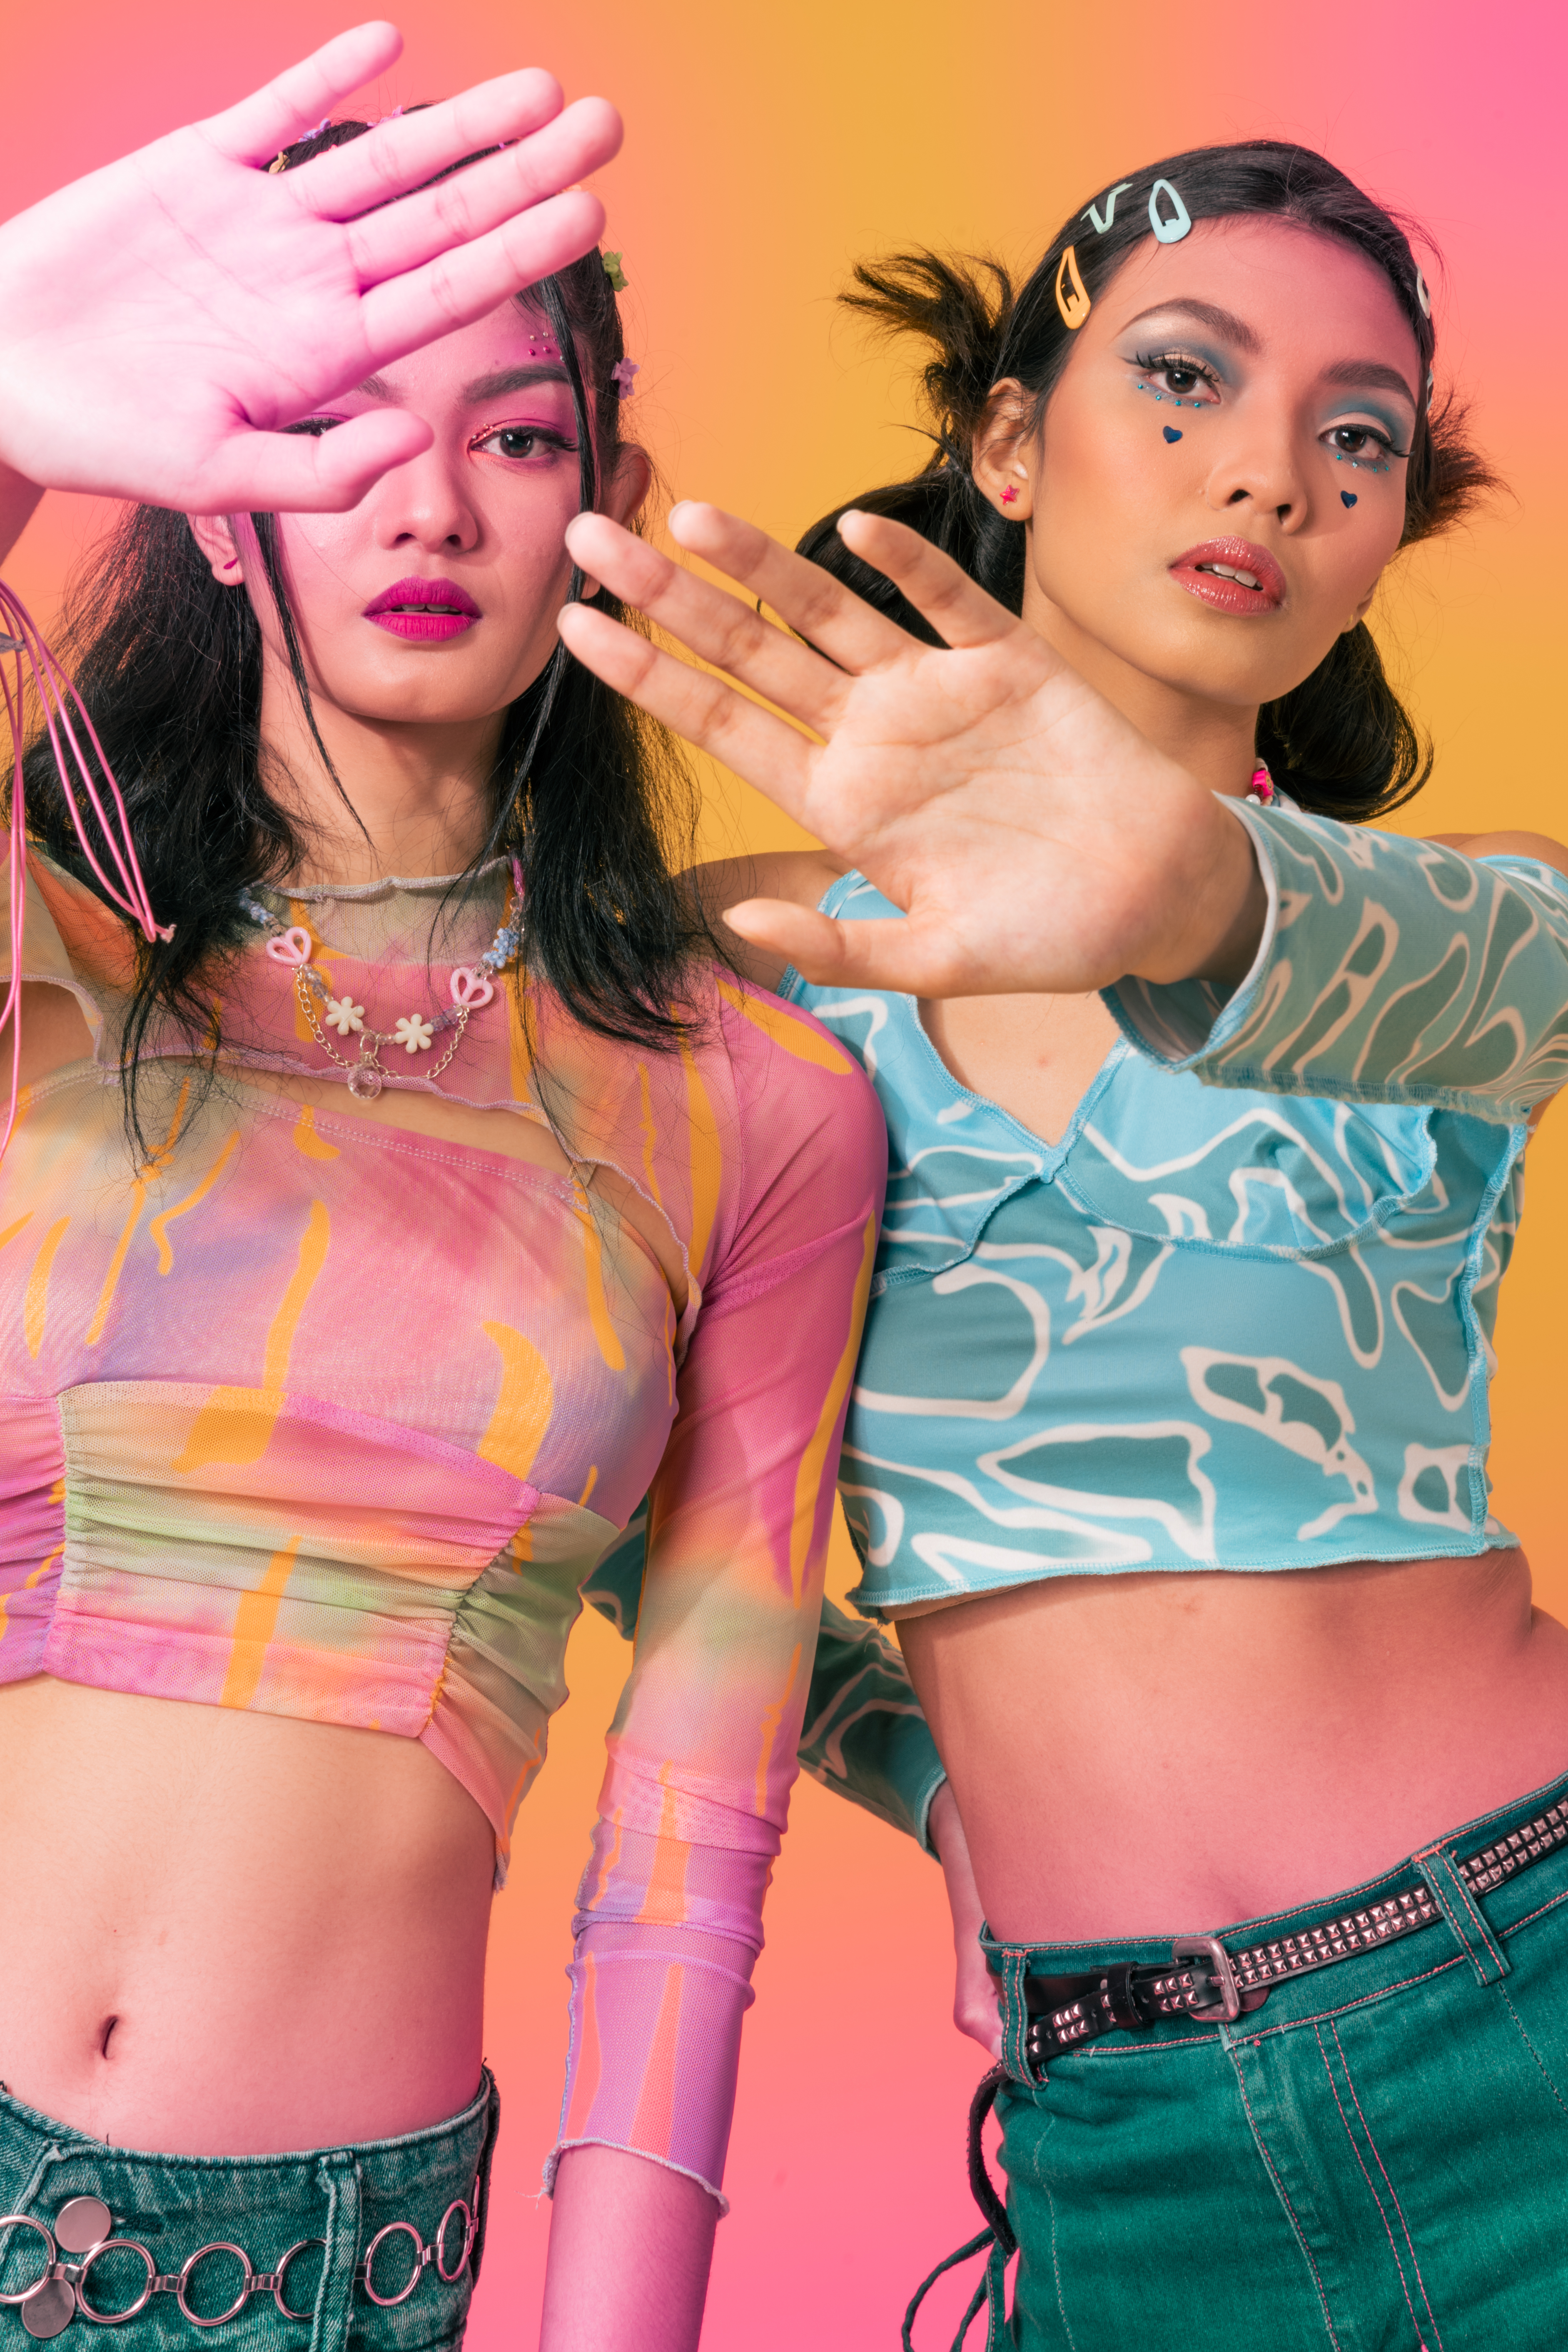 Portrait of Young Women in 90s Fashion